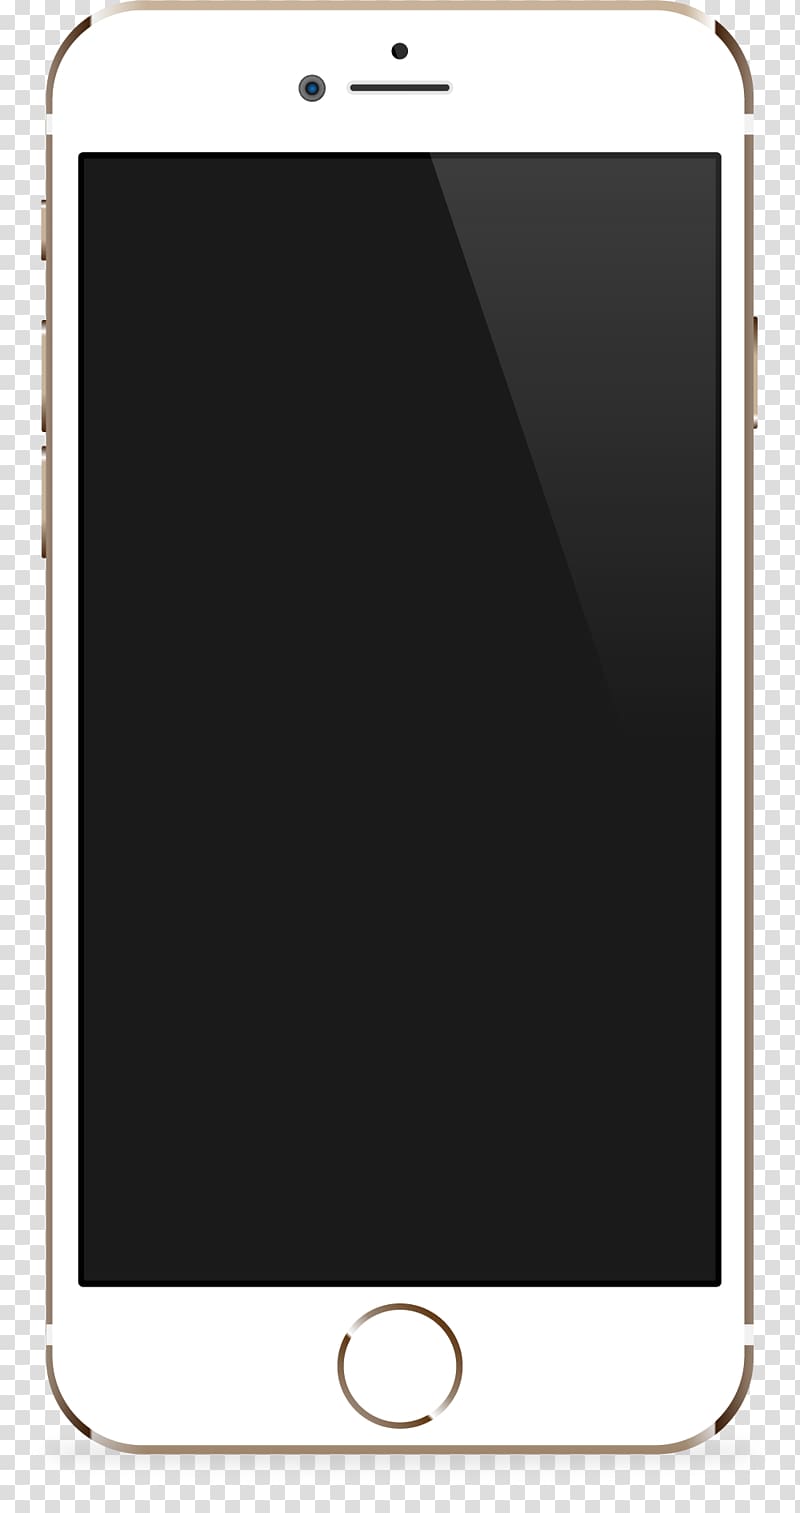 gold iPhone 6 illustration, iPhone 8 iPhone 7 iPhone X Smartphone iPhone 6s Plus, iPhone玫瑰金 transparent background PNG clipart